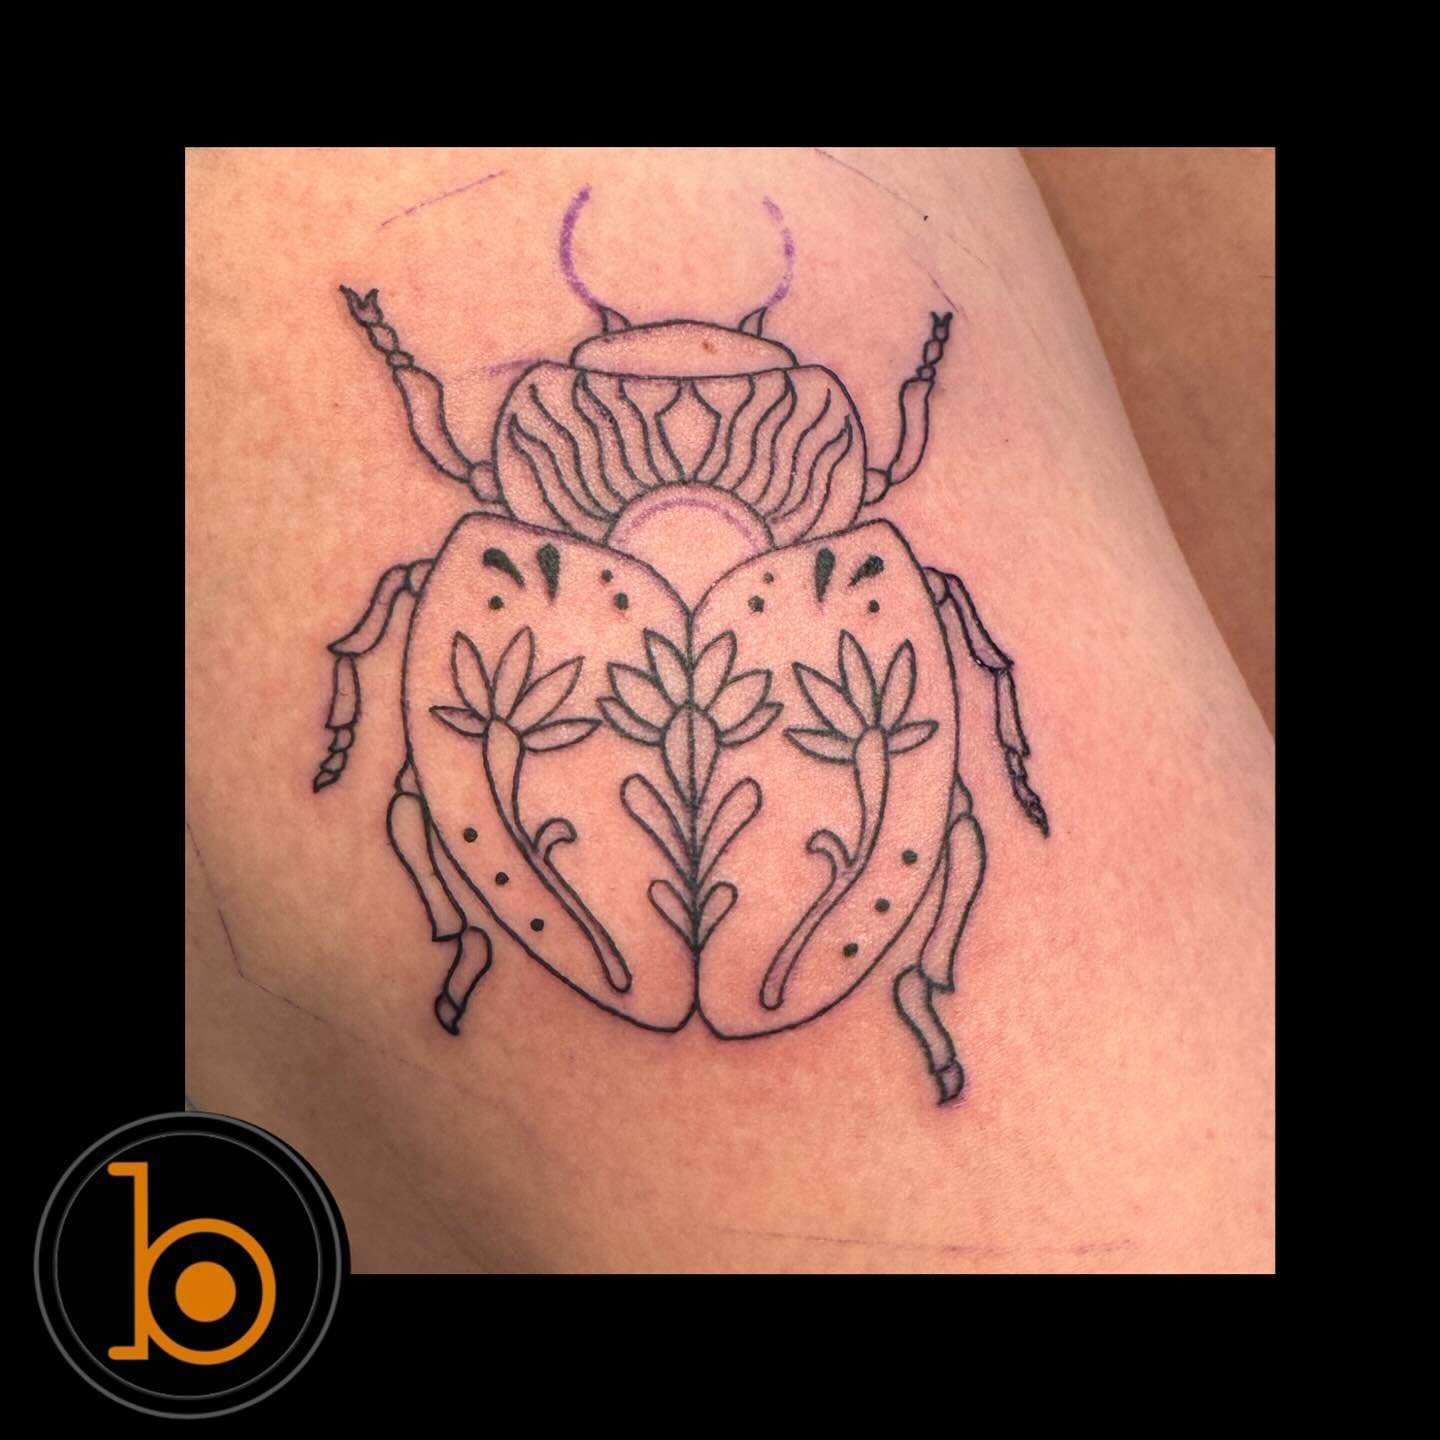 ➡️Swipe➡️ to see this beetle come to life with some shading! Done by resident artist @vct.tattoos 🪲🌸
➖➖➖➖➖➖➖➖➖➖➖➖➖➖➖➖➖
Blueprint Gallery
138 Russell St
 Hadley MA 01035
📱(413)-387-0221 
WALK-INS WELCOME 
🕸️ www.blueprintgallery.com 🕸️
⬇️⬇️⬇️⬇️⬇️